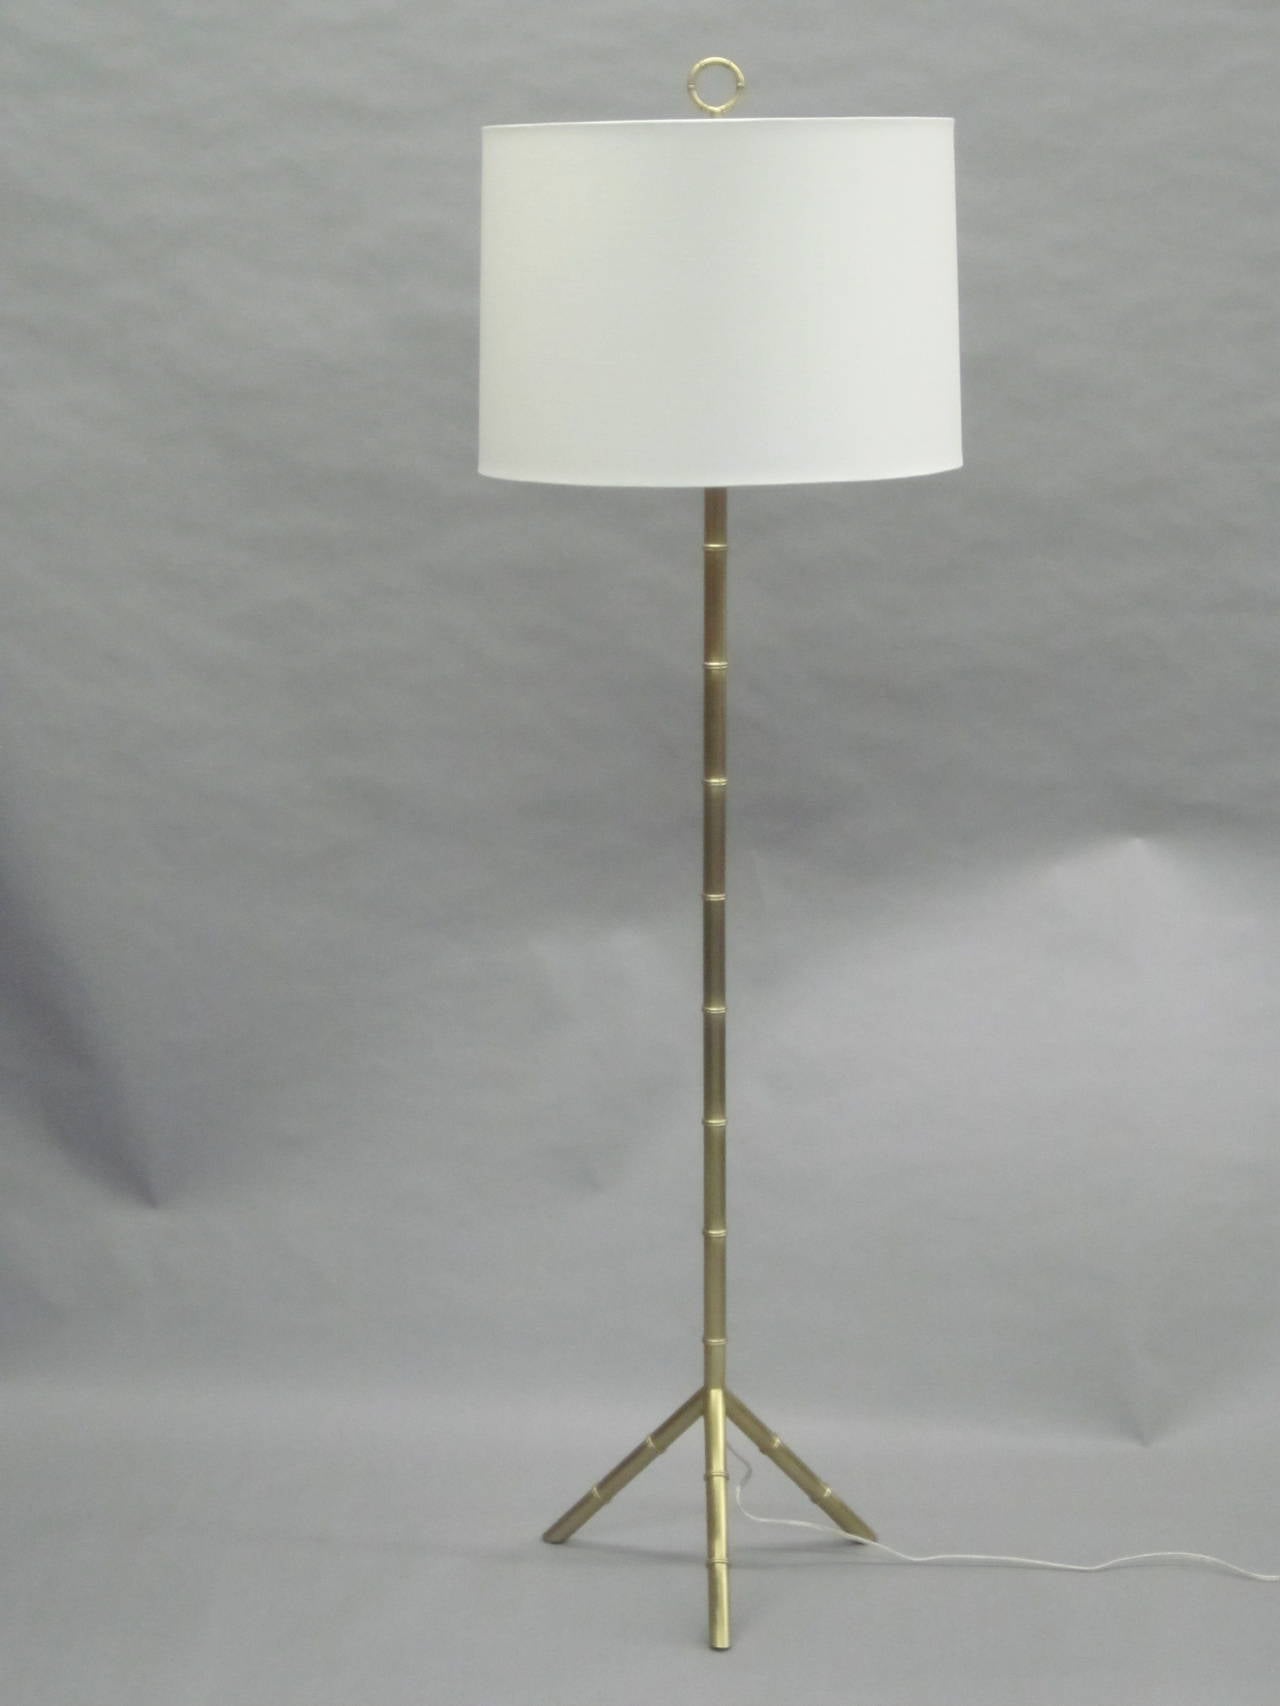 Elegant and timeless pair of French mid-century style Modern Neoclassical brass faux bamboo standing lamps in the style of Jacques Adnet. The lamps have perfect form, line and proportions and convey refinement with their delicate faux bamboo